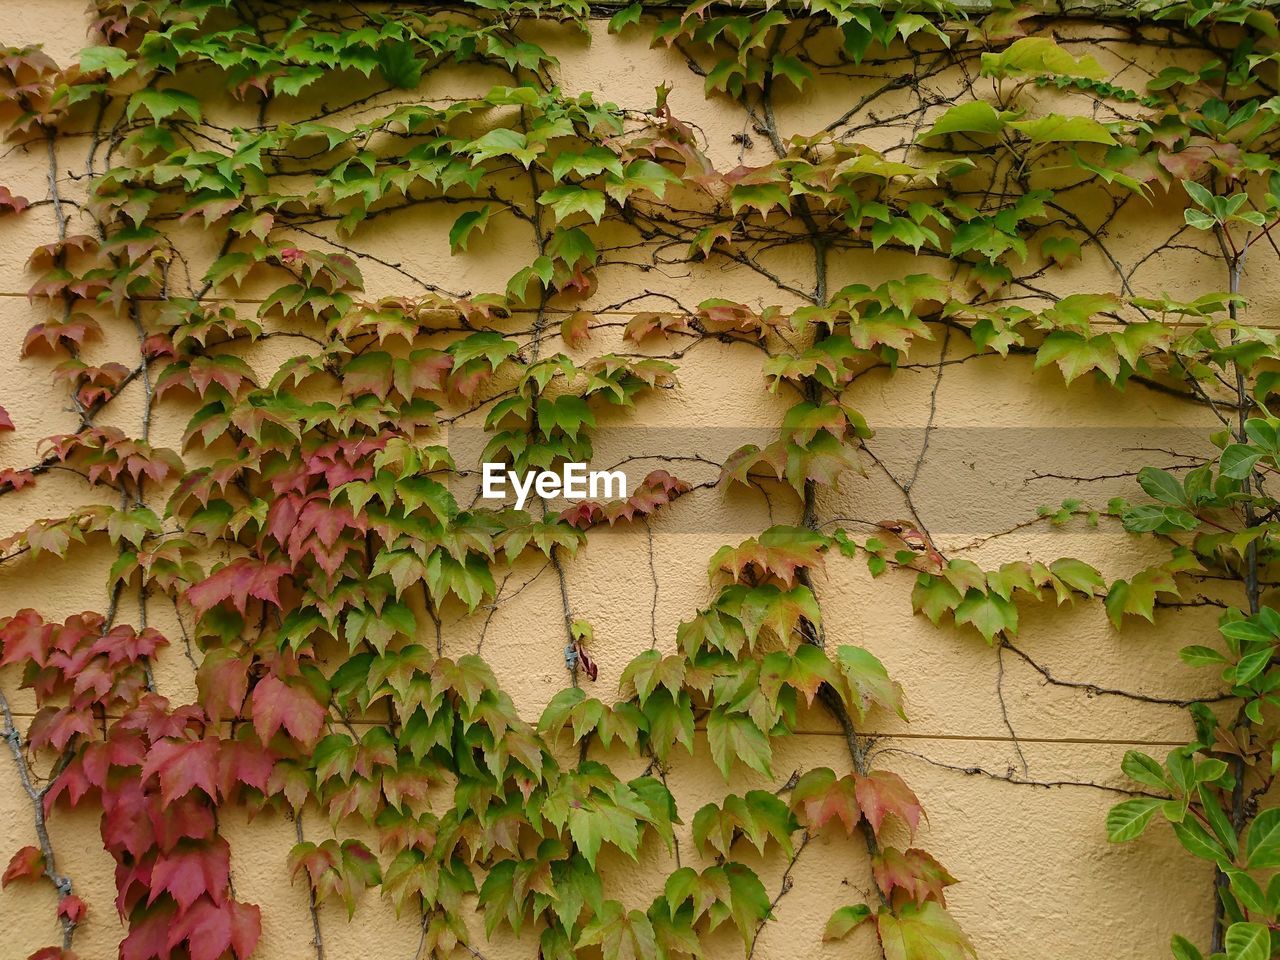 IVY GROWING ON WALL